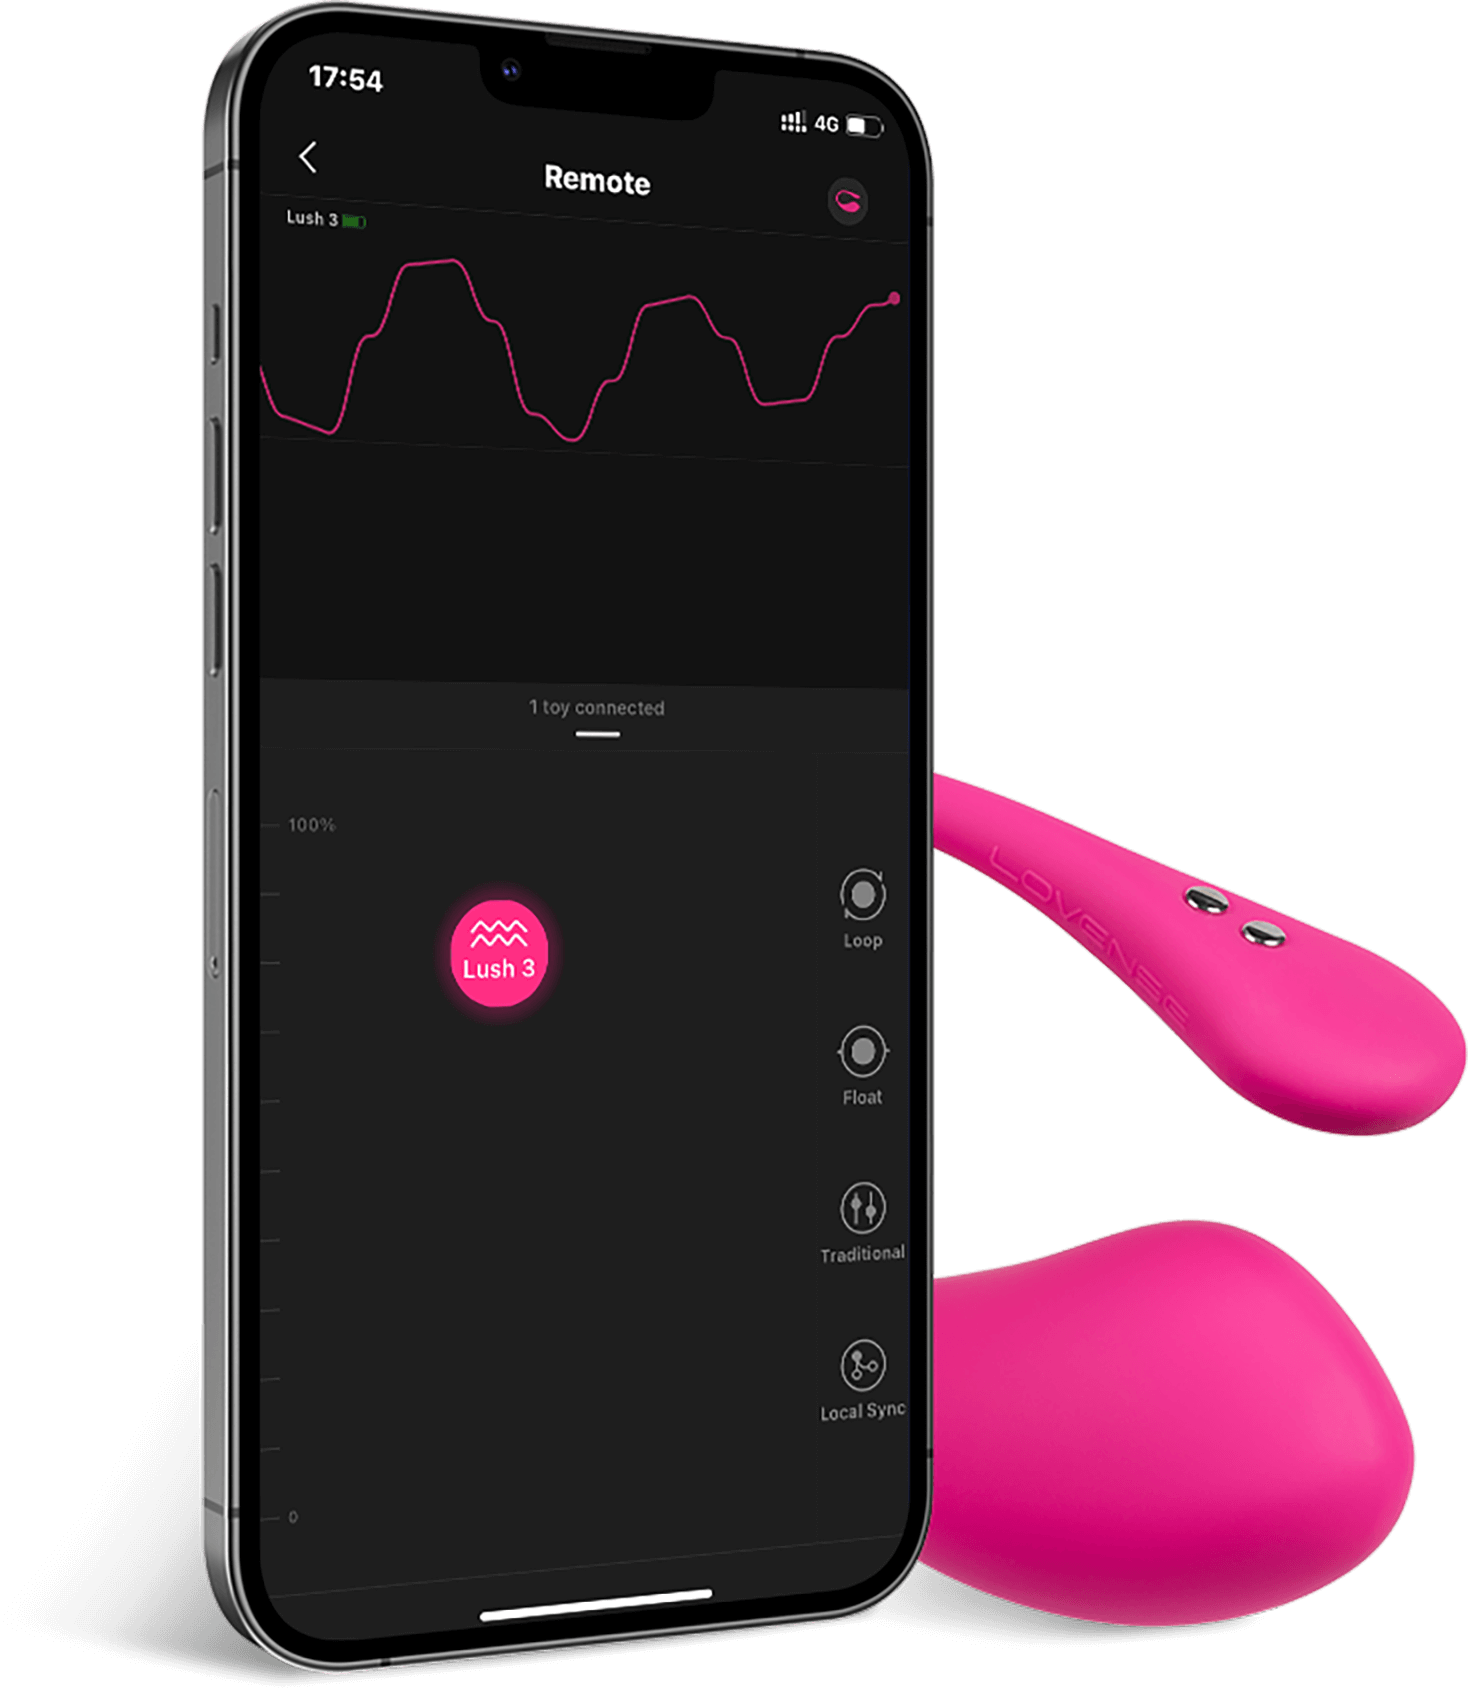 Lush 3 and Lovense Remote app features